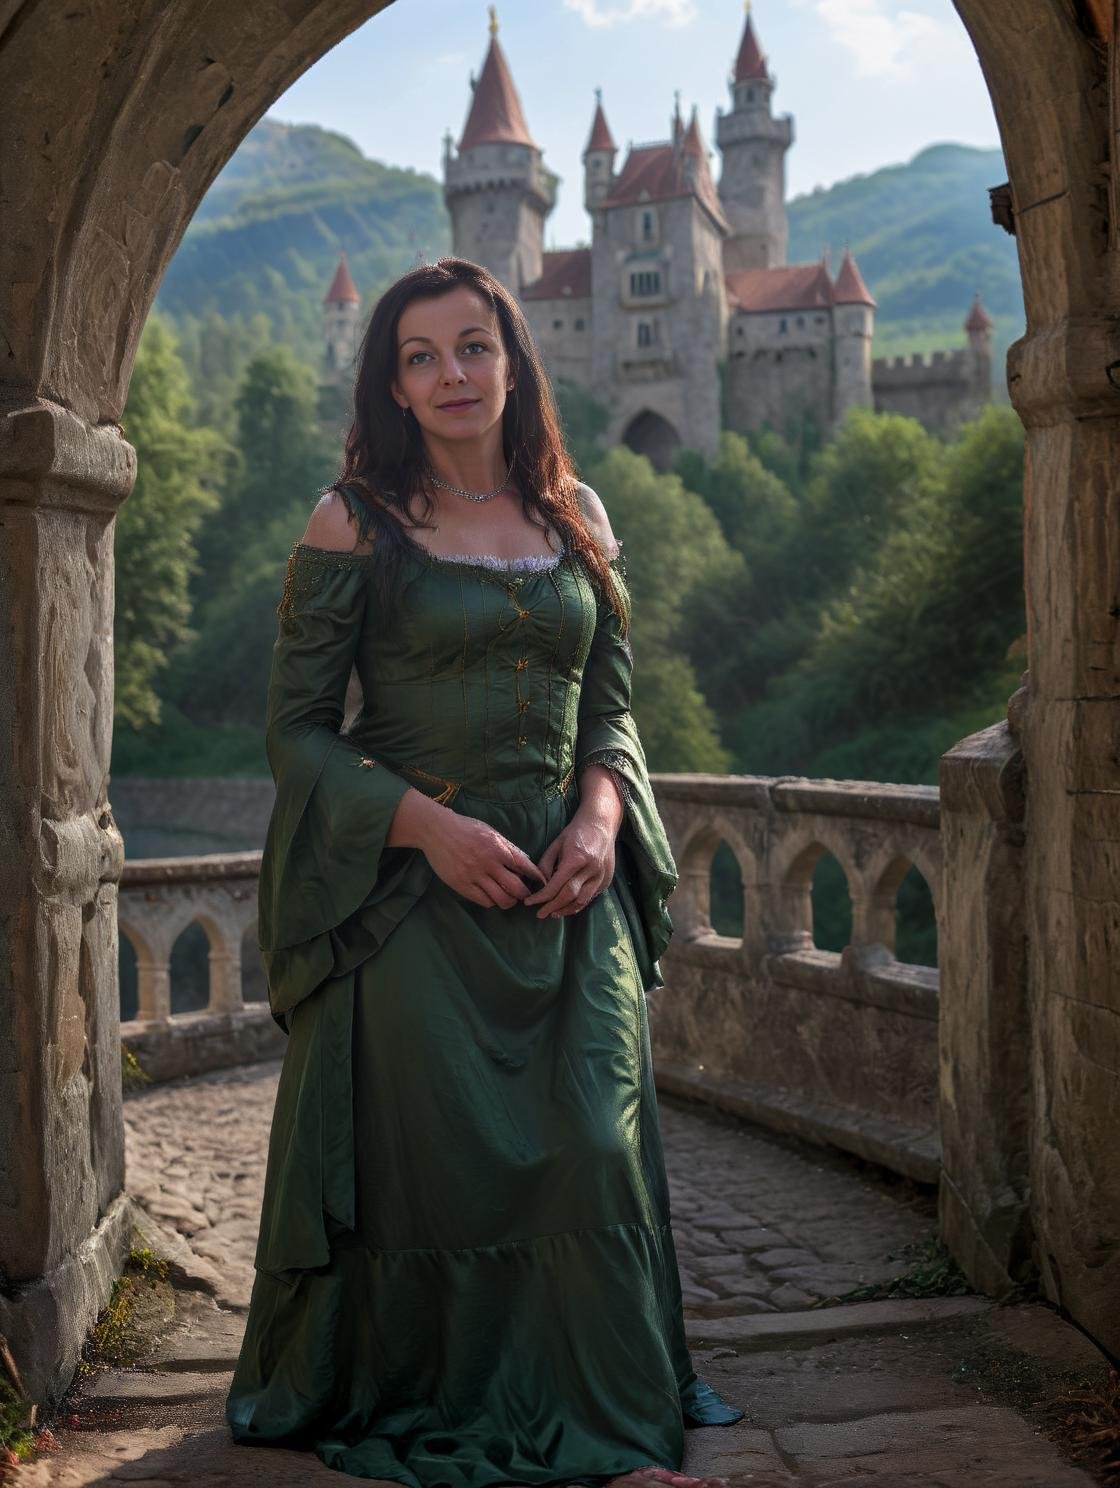 Hyperrealistic art beautiful cute 40 y.o. <lora:Mjulla_XL:1.2> Julka girl  is standing next to castle bridge, wearing green baroque dress, castle in background . Extremely high-resolution details, photographic, realism pushed to extreme, fine texture, incredibly lifelike  <lora:polyhedron_god rays-000007:0.4> <lora:Castle_manor:0.6>